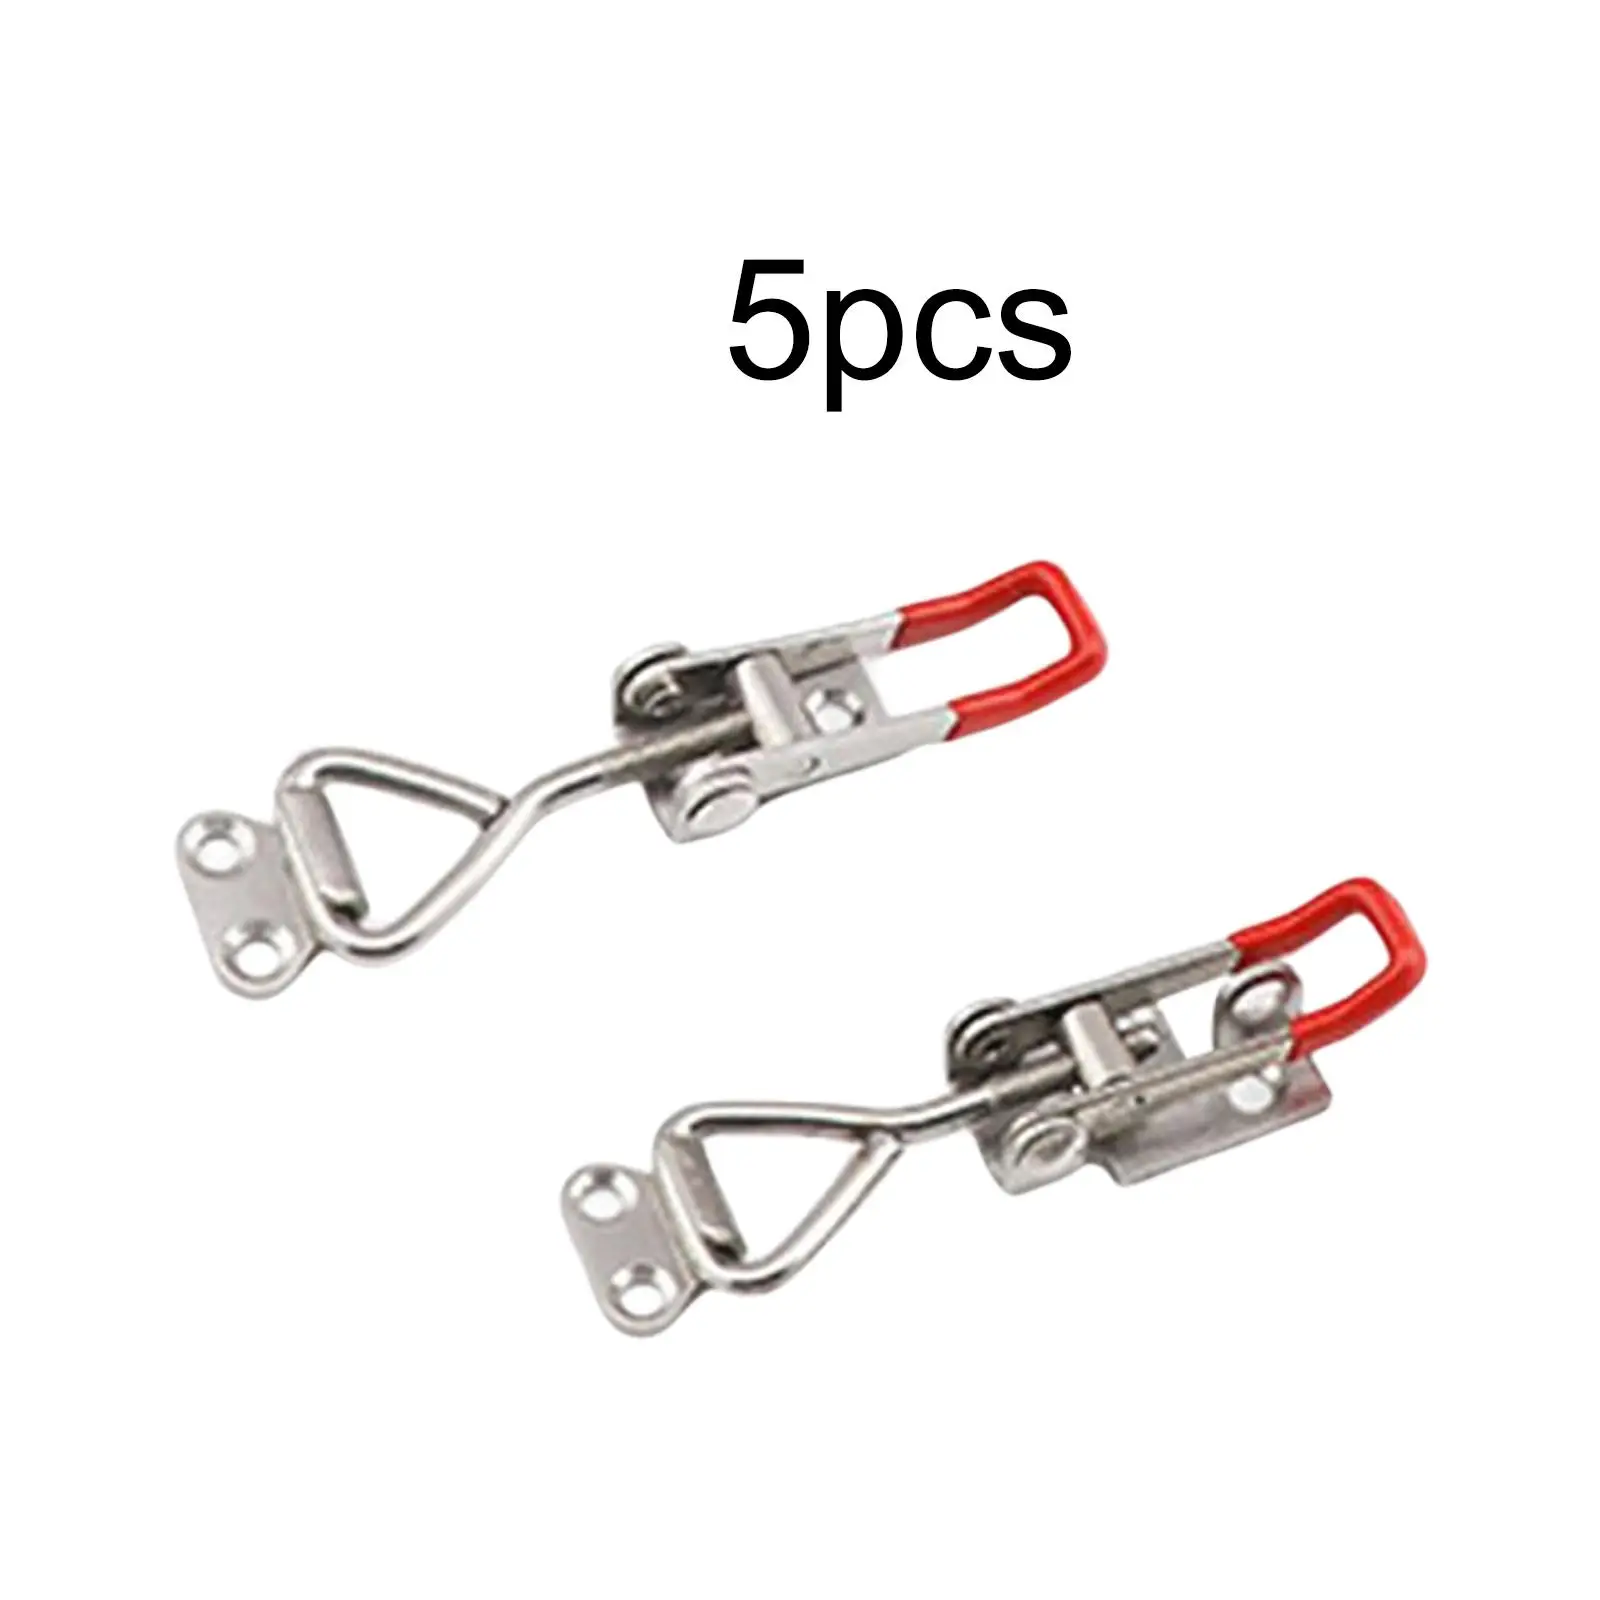 5Pcs Push Pull Toggle Clamp Stainless Steel Anti Slip Hand Tool Reliable Horizontal Sturdy for Home Sliding Door Woodworking